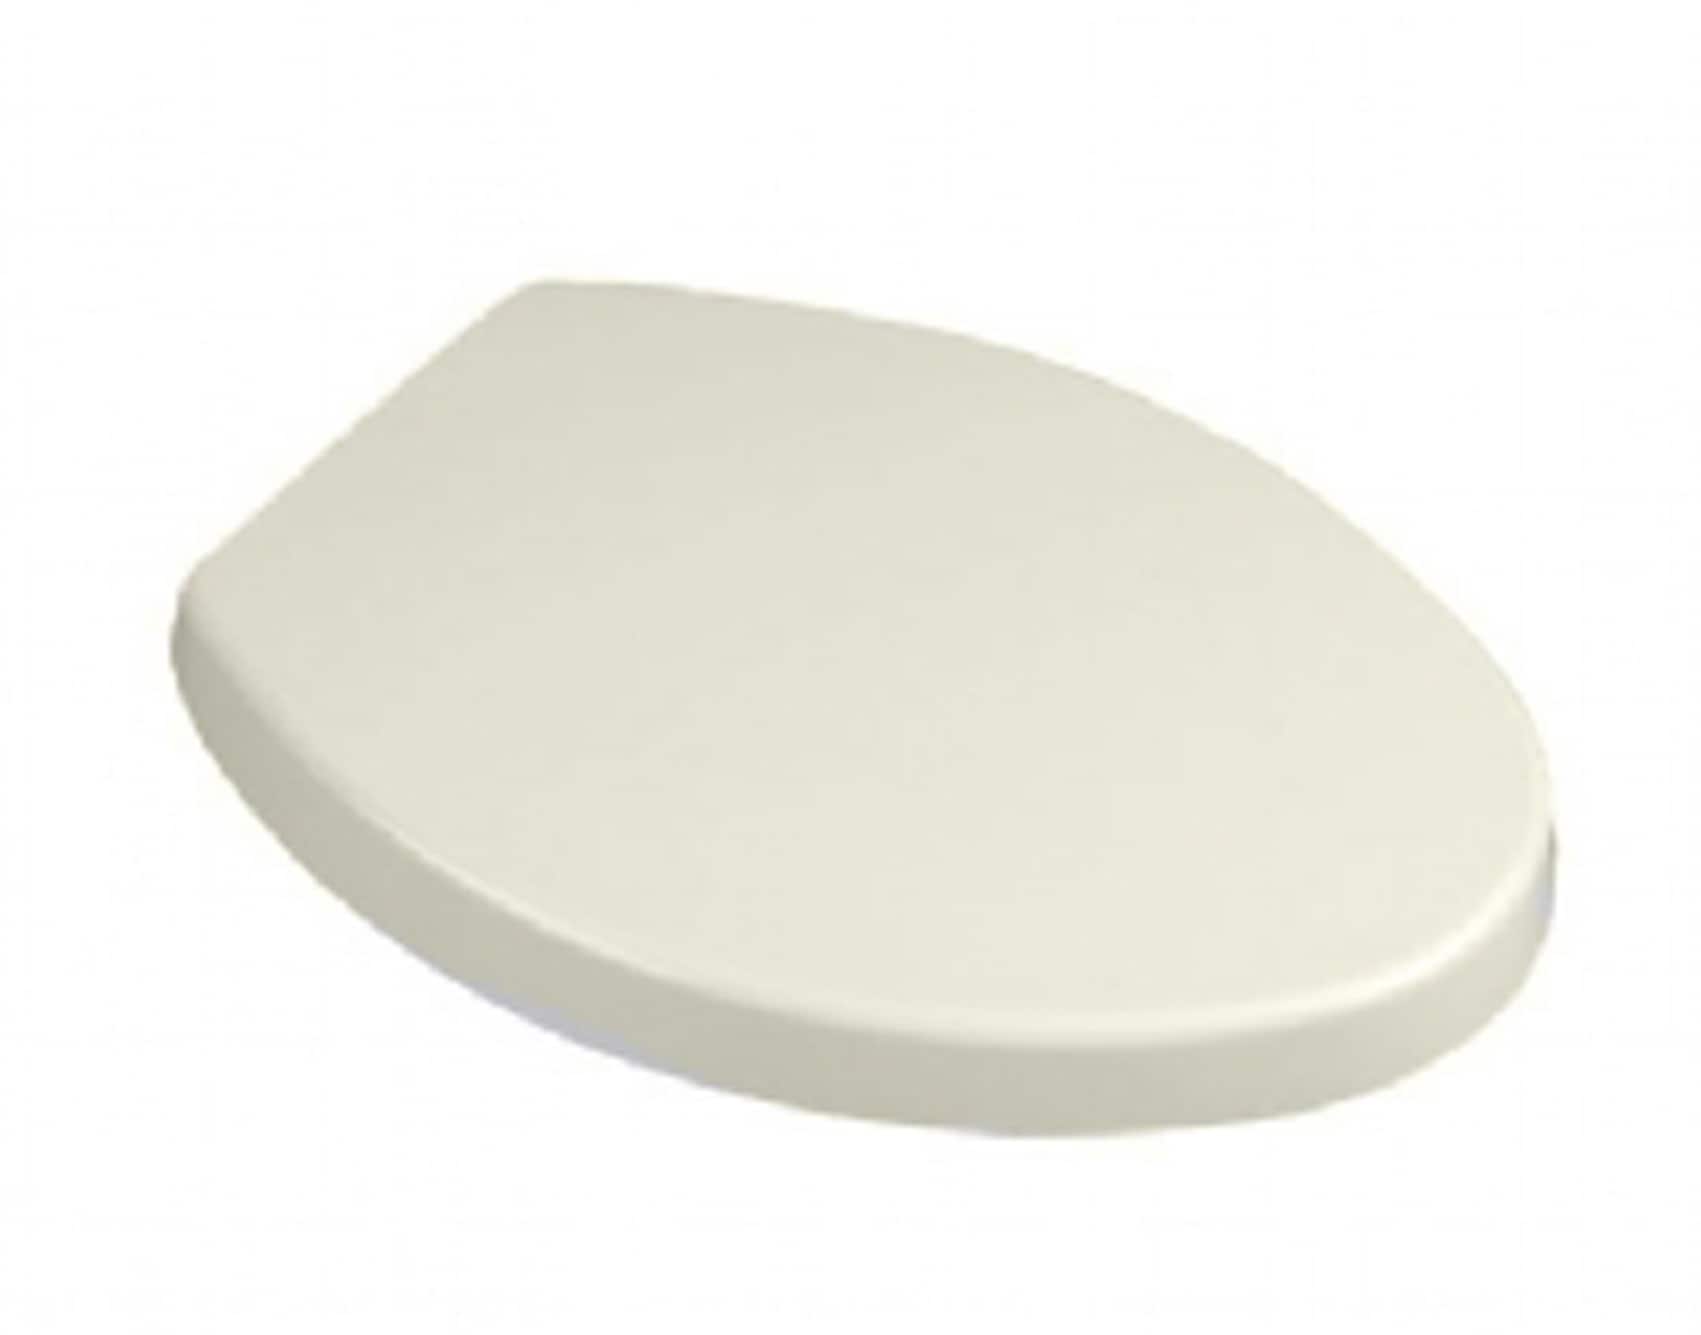 Aim to Wash! Smart toilet seat Resin White Elongated Soft Close